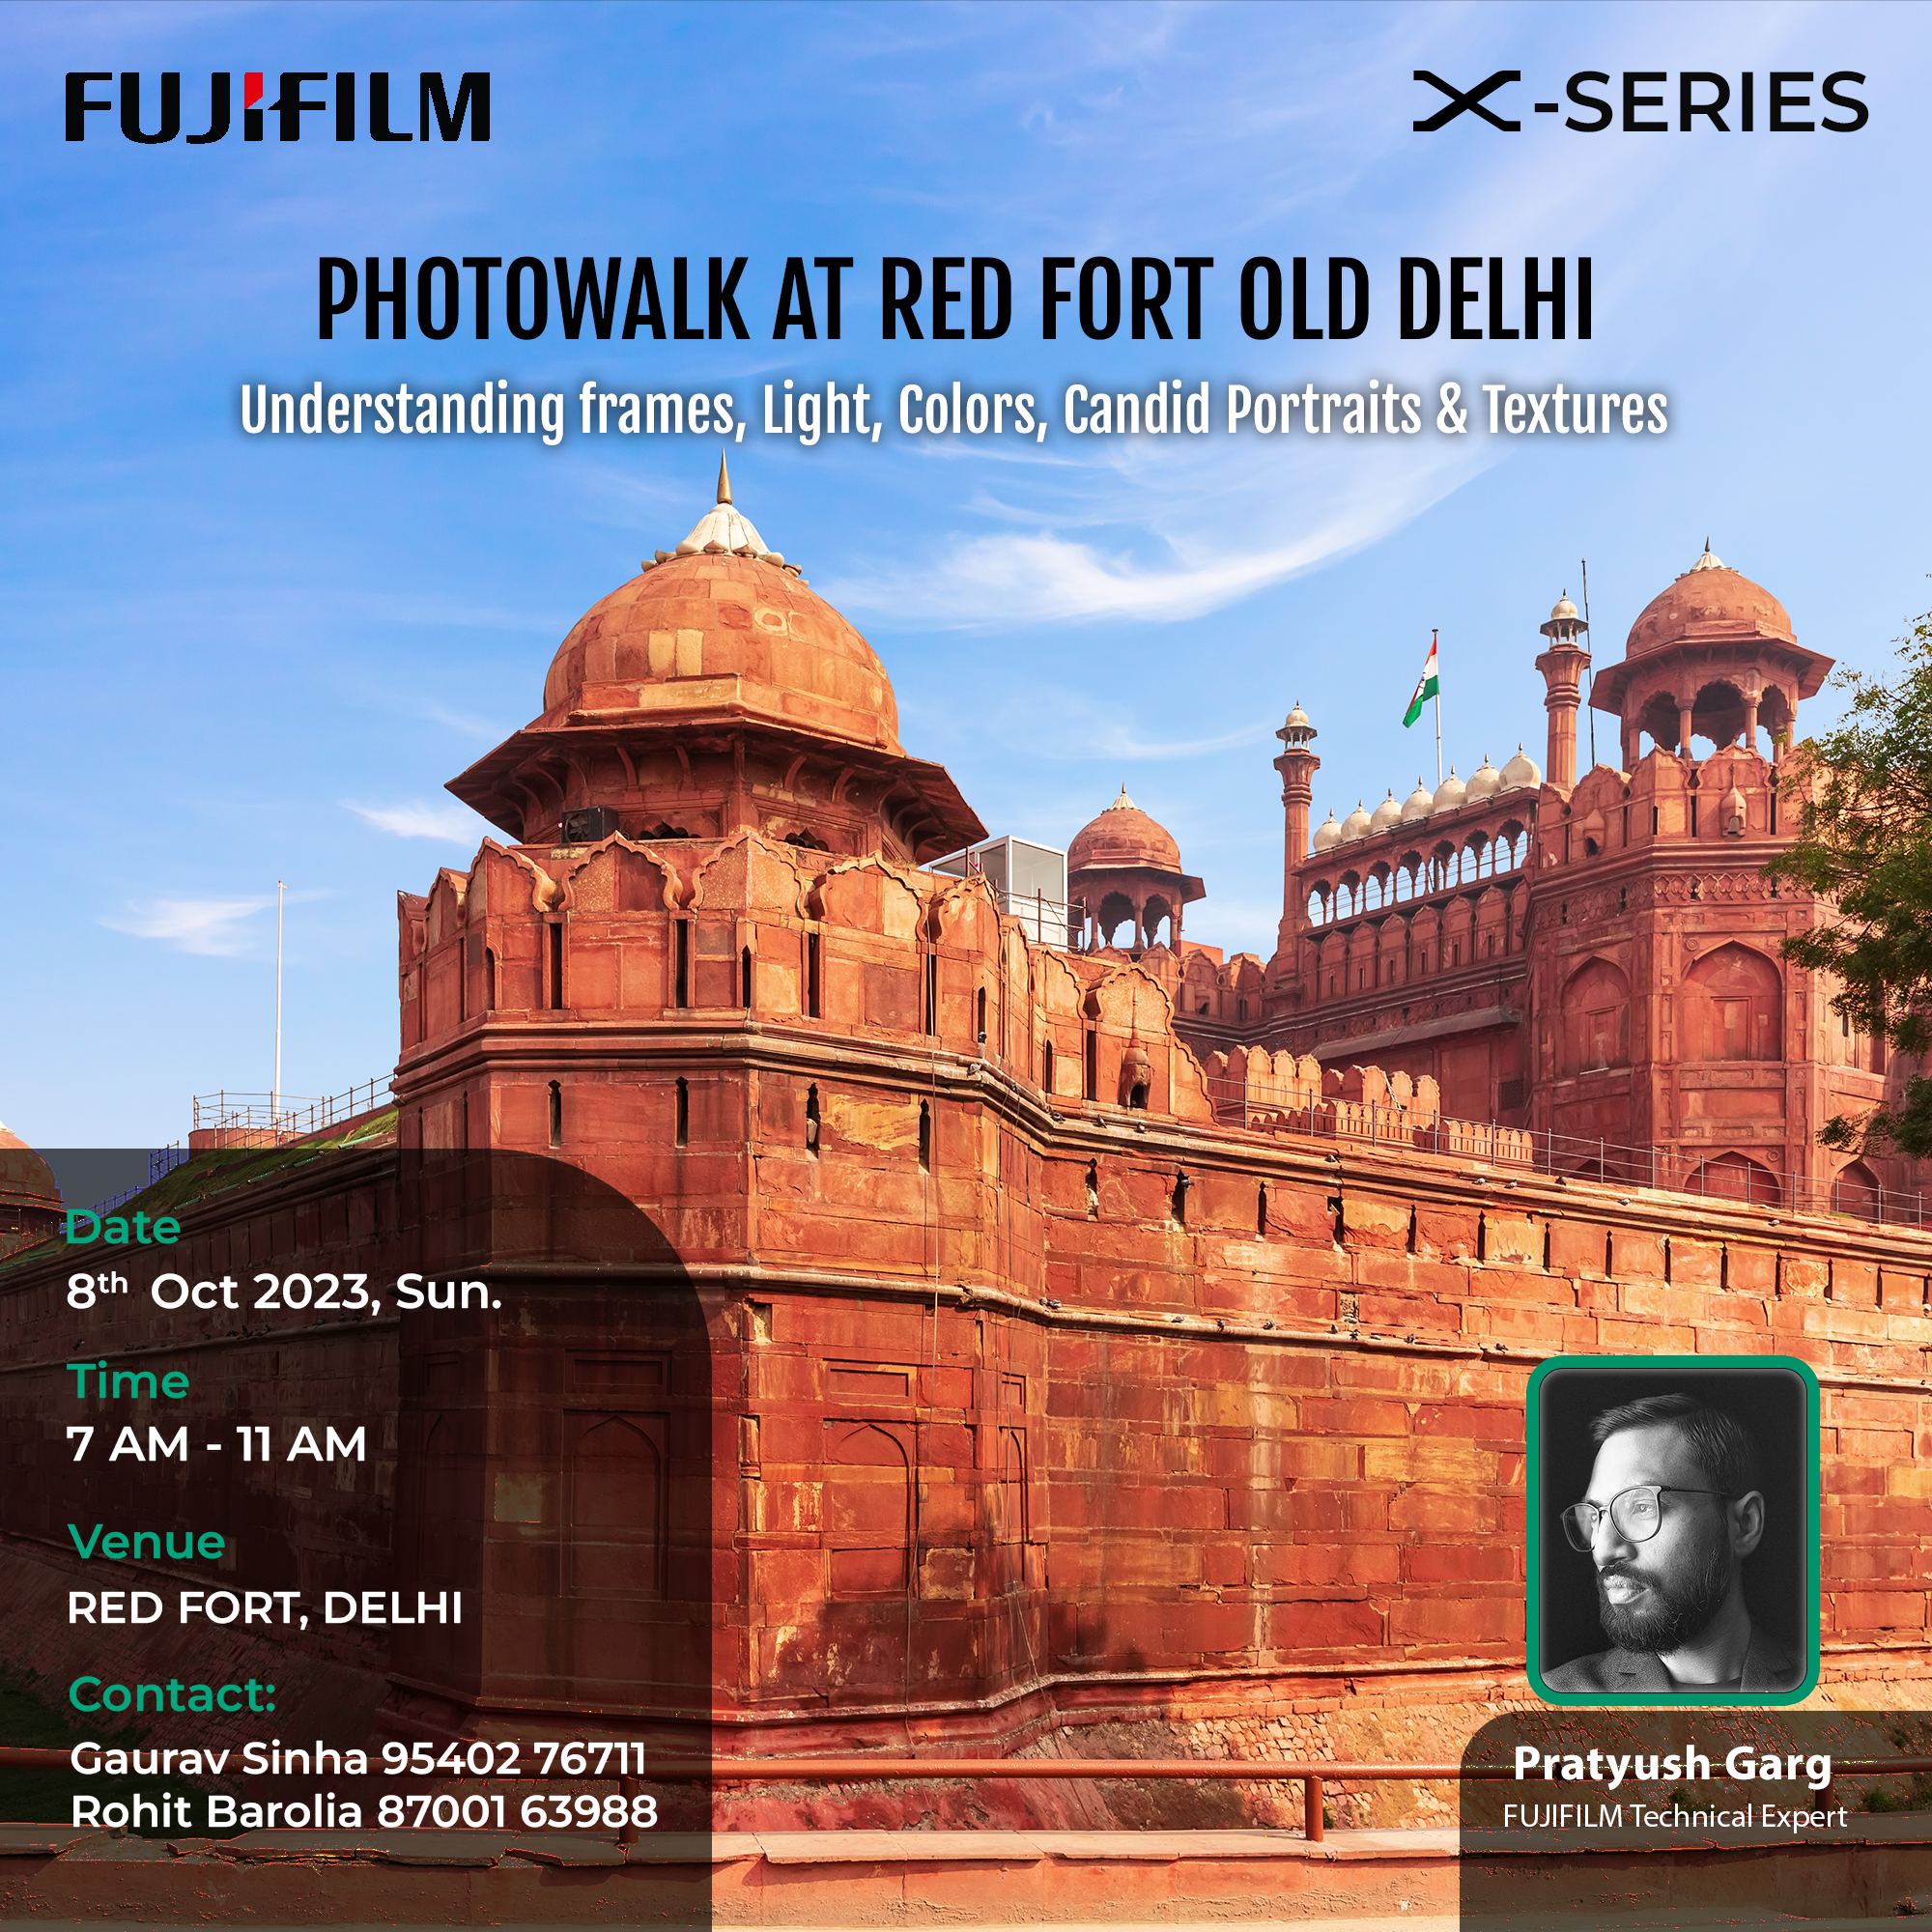 Photowalk at Red Fort Old Delhi